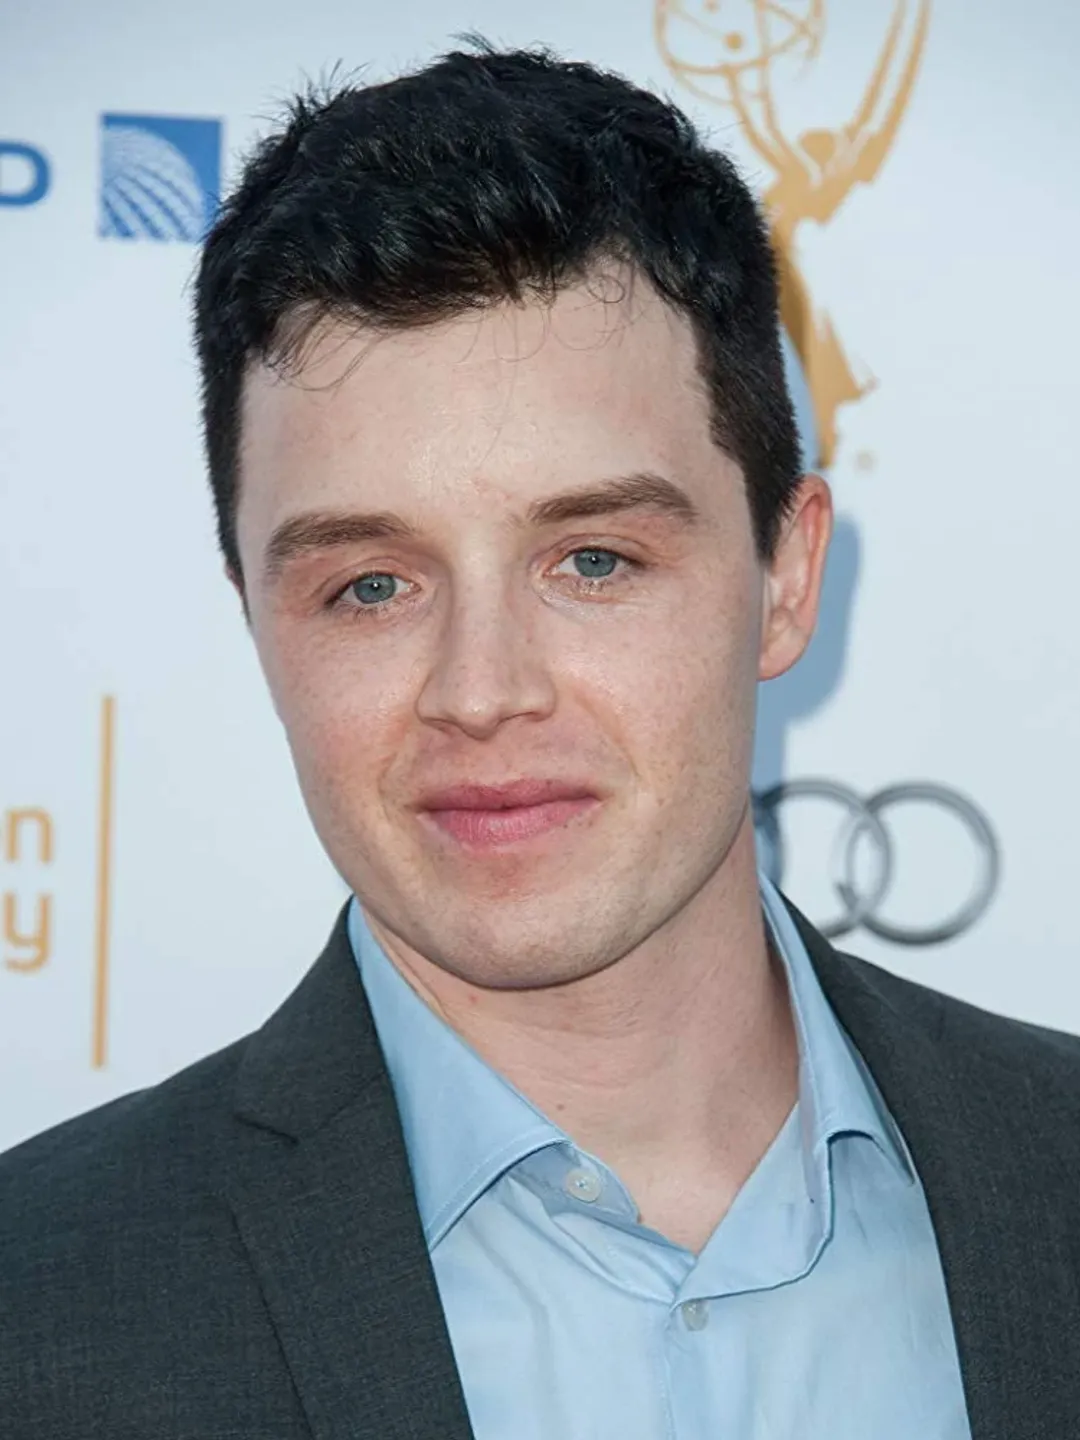 Noel Fisher who is his father